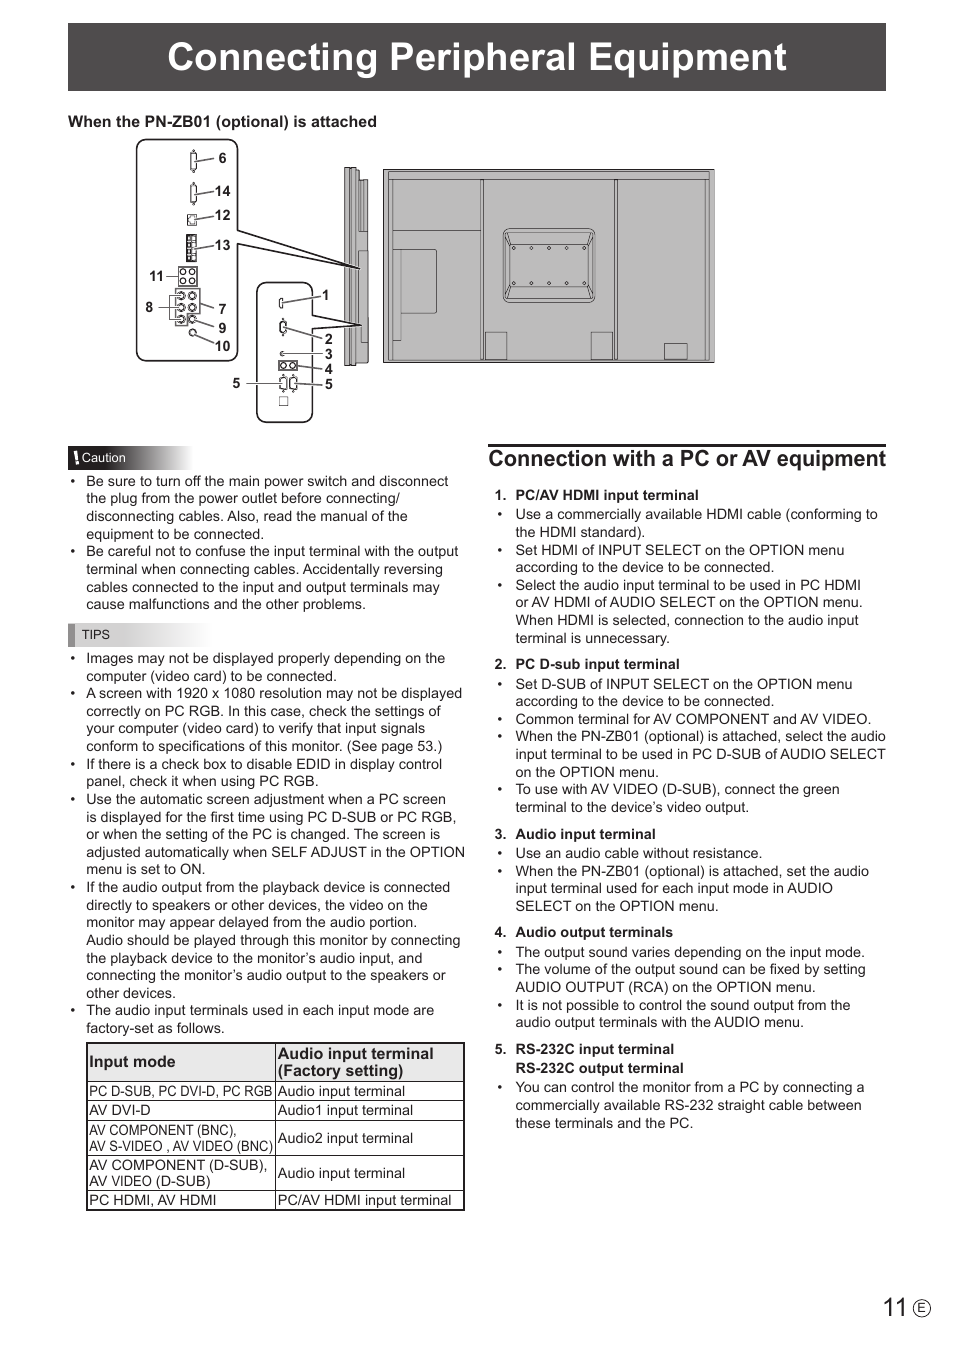 Connecting peripheral equipment, Connection with a pc or av equipment | Sharp PN-E802 User Manual | Page 11 / 56